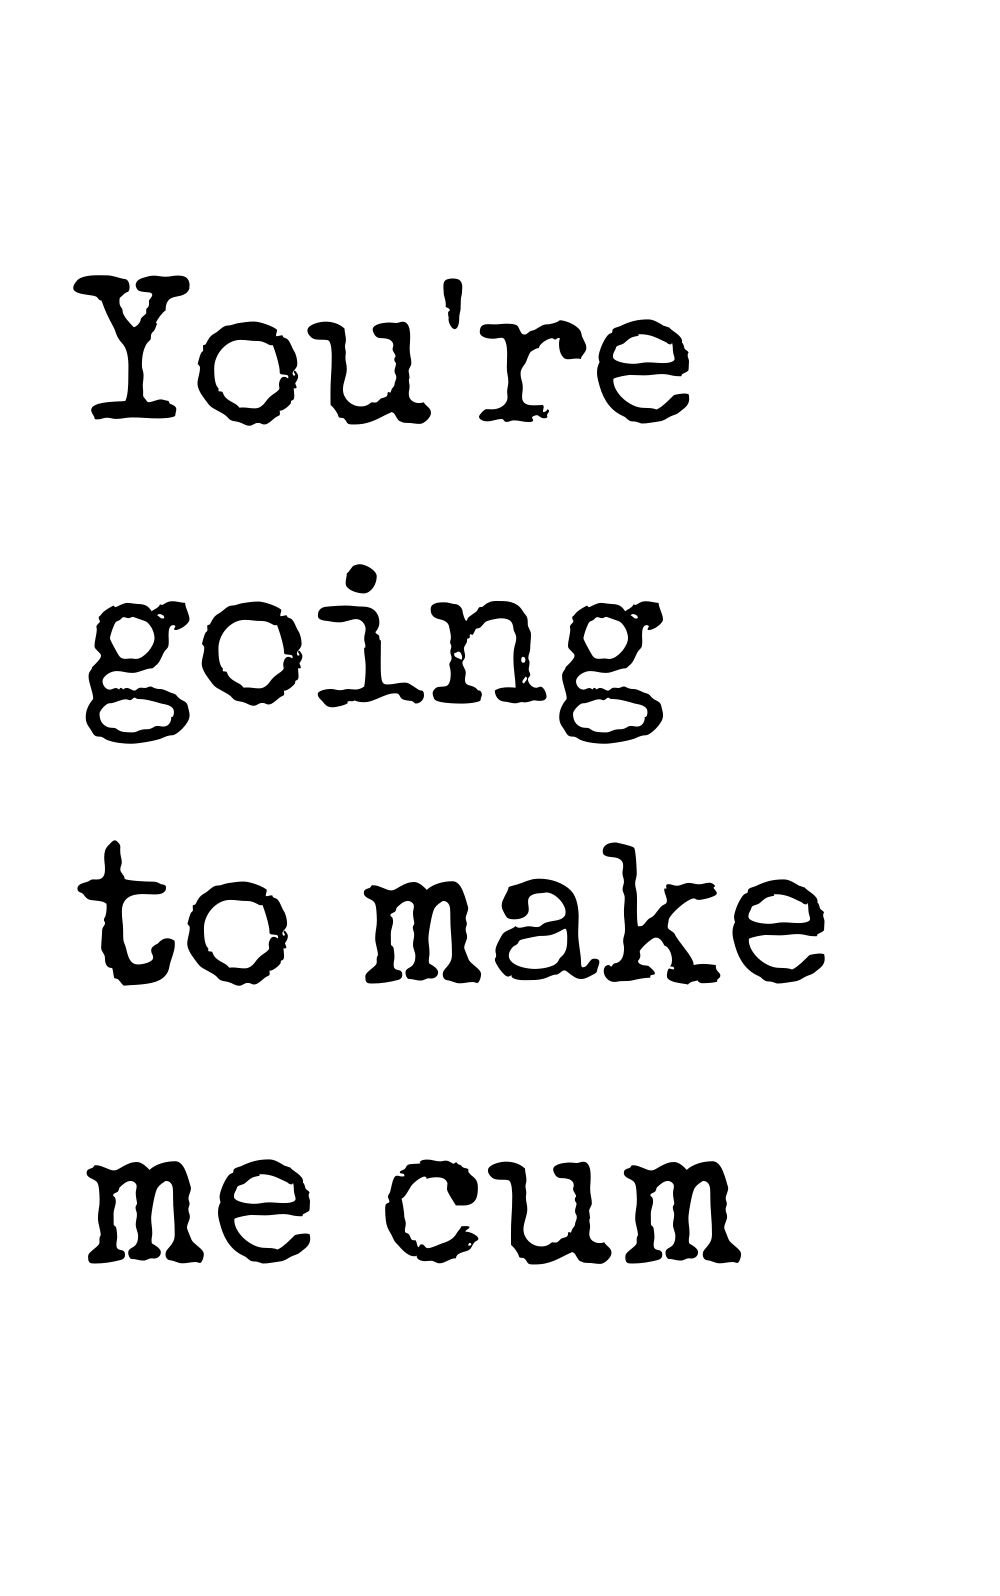 youre going to make me cum